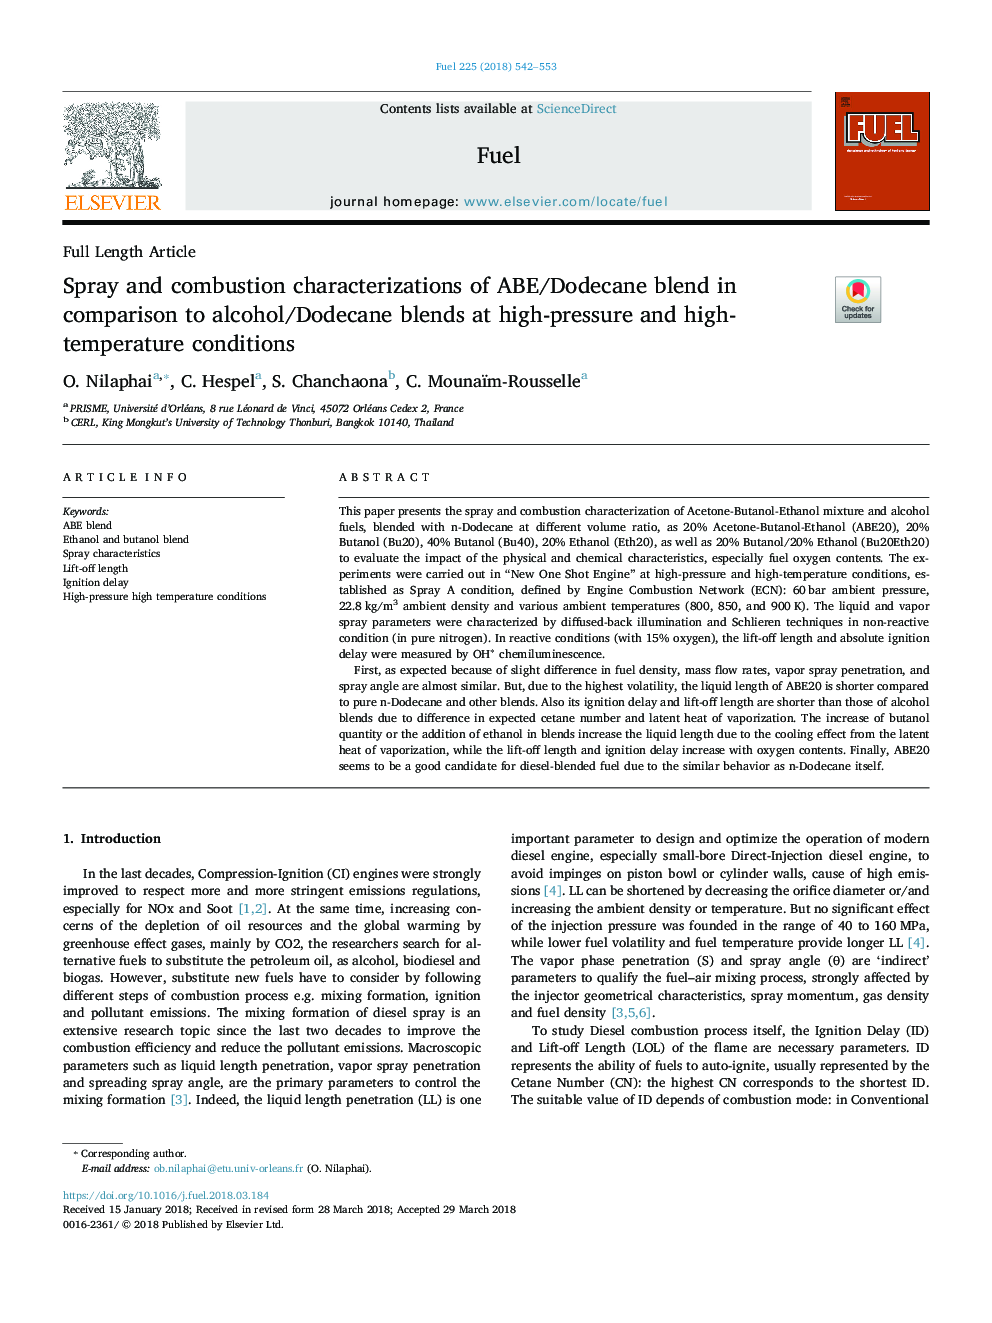 Spray and combustion characterizations of ABE/Dodecane blend in comparison to alcohol/Dodecane blends at high-pressure and high-temperature conditions